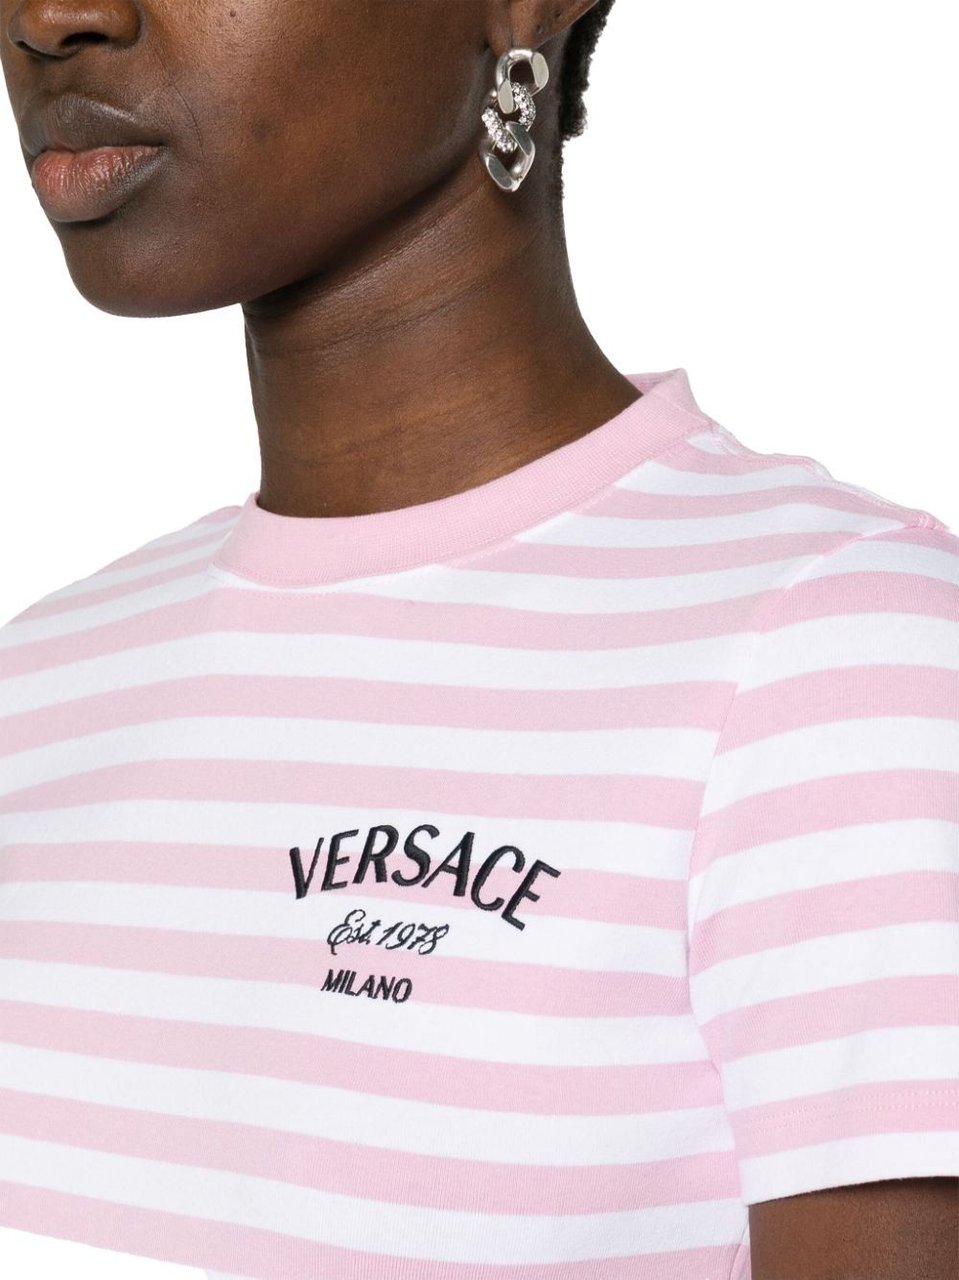 Versace Top White Wit